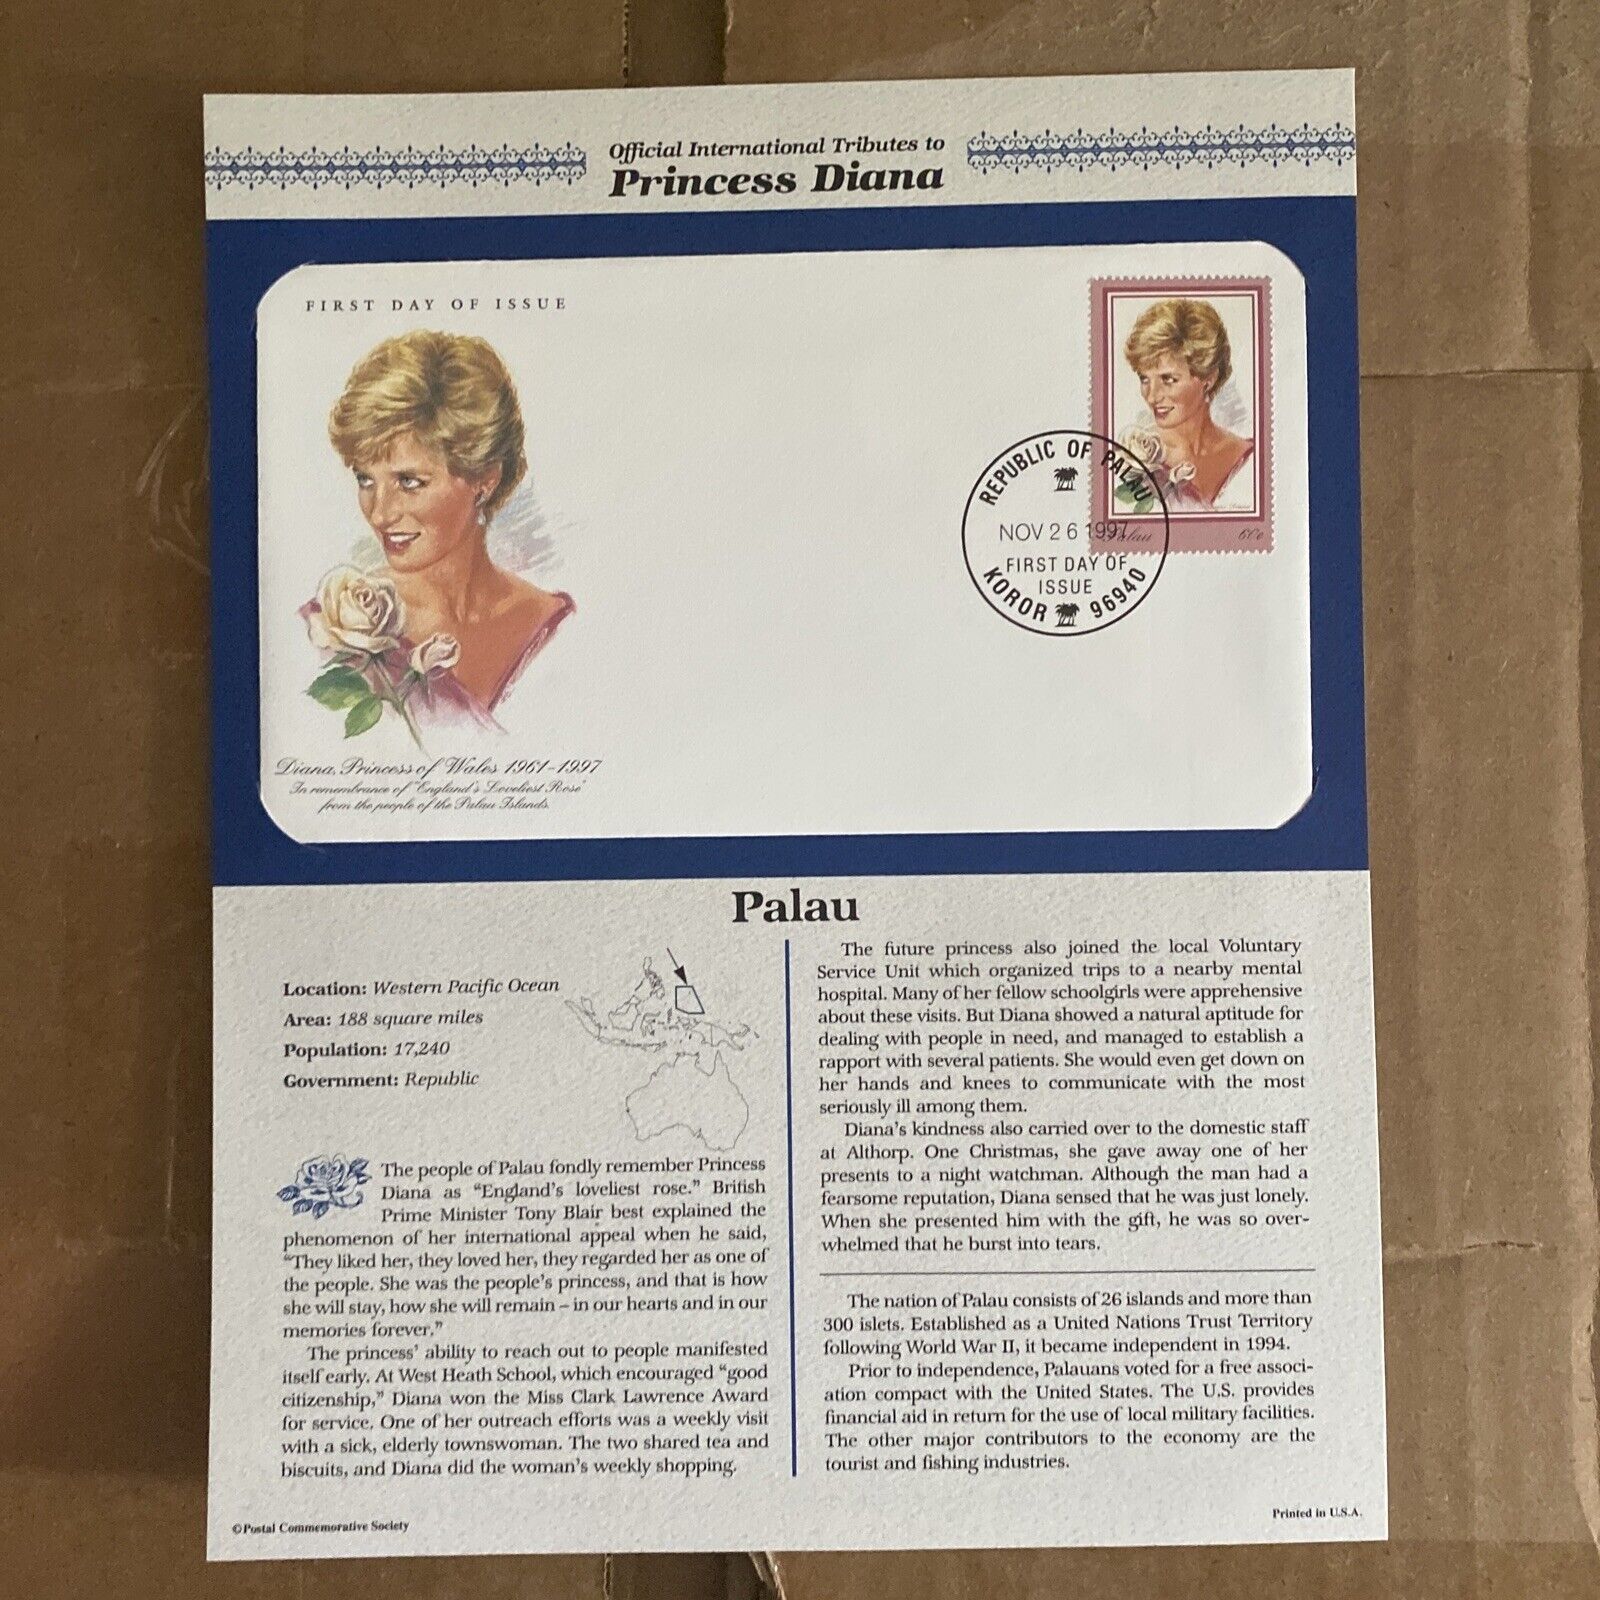 Official International Tributes to Princess Diana First Day Issue PALAU